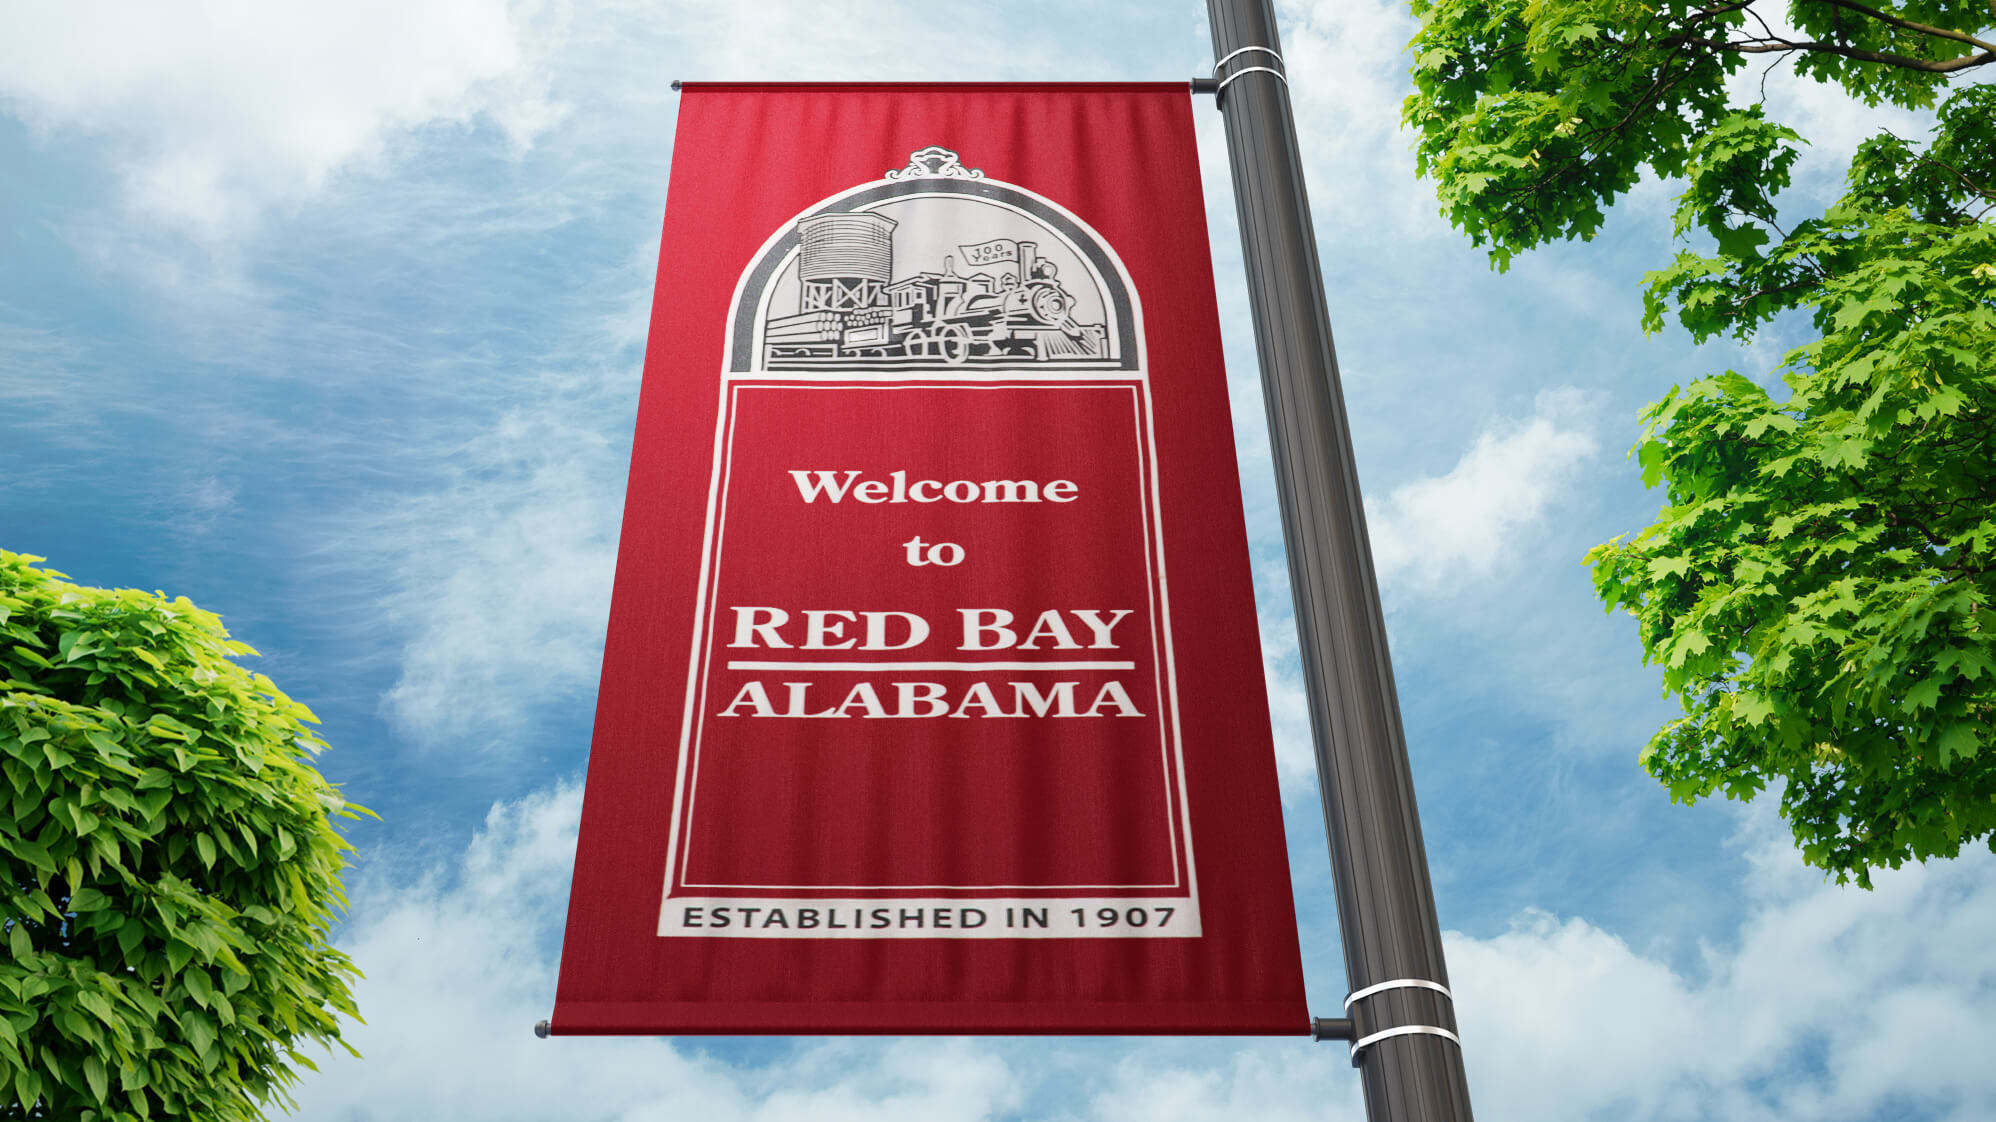 What To Do in Red Bay, Alabama